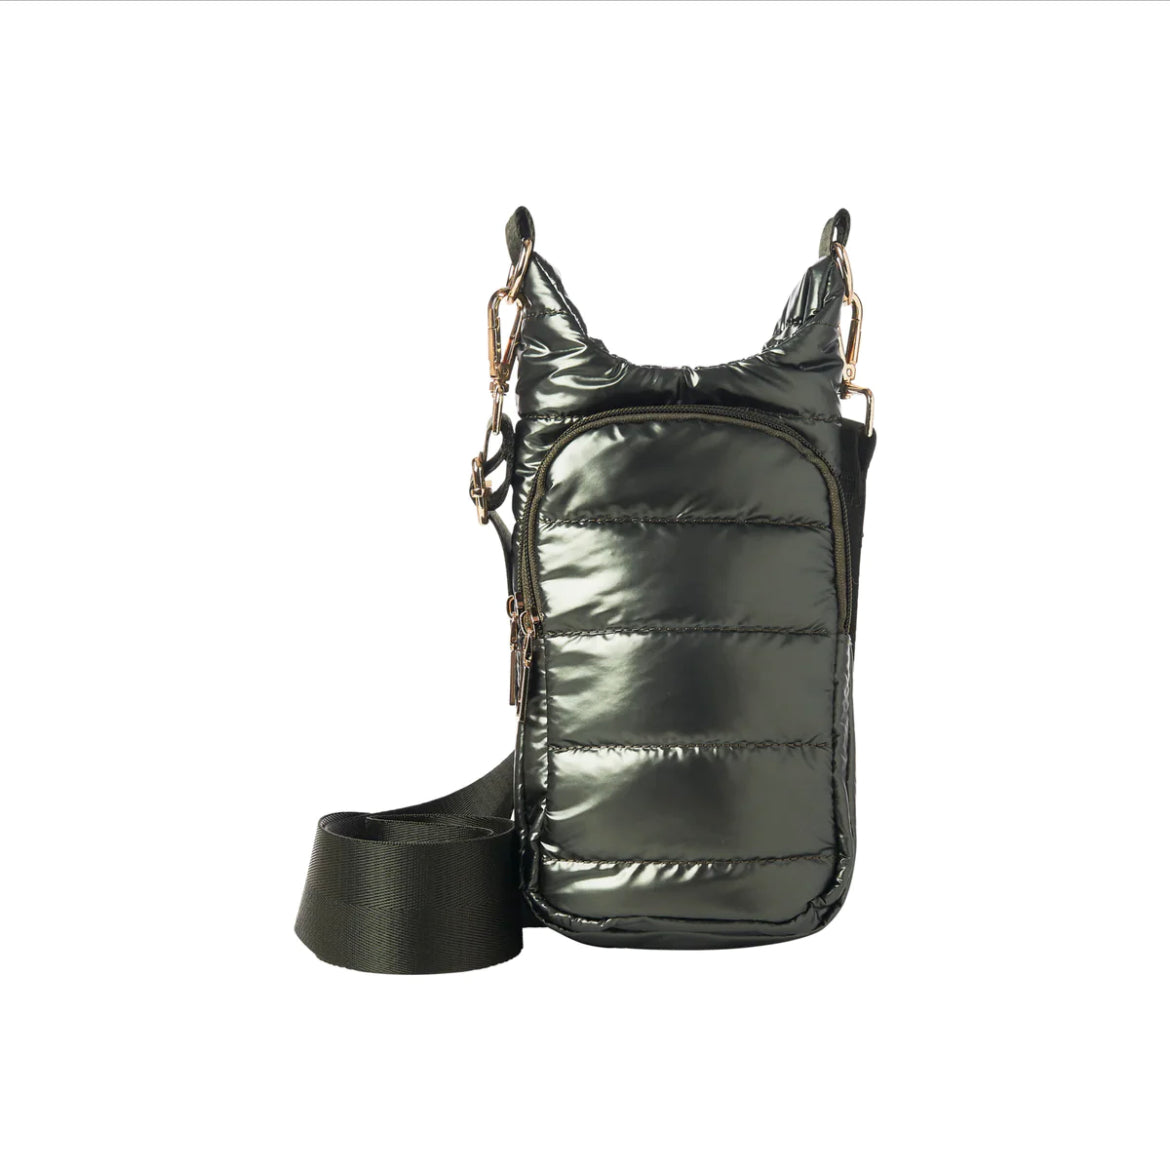 Army Green Shiny HydroBag with Army Green Solid Strap